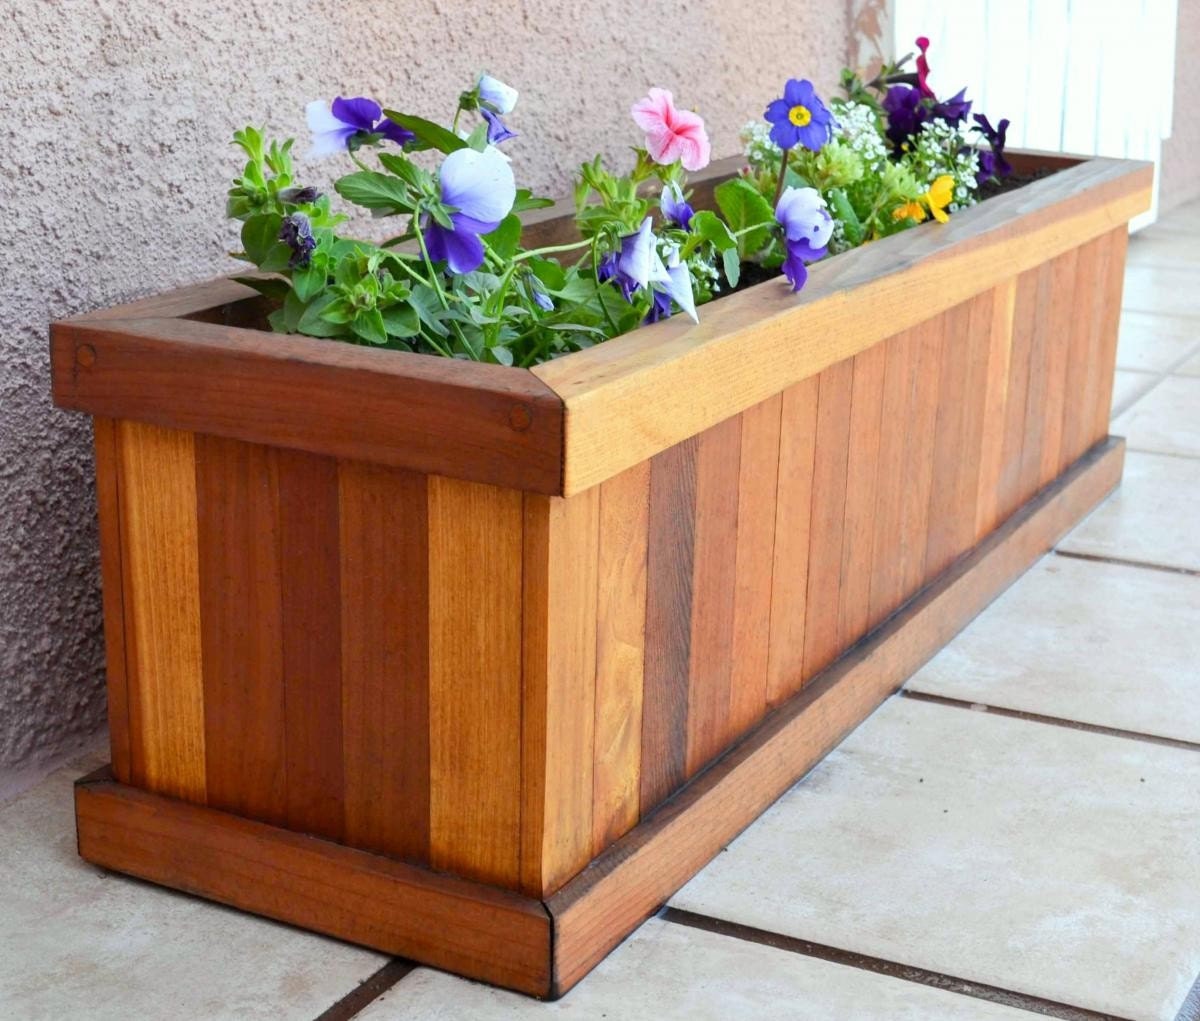 27 to 44 redwood planter boxes for windows